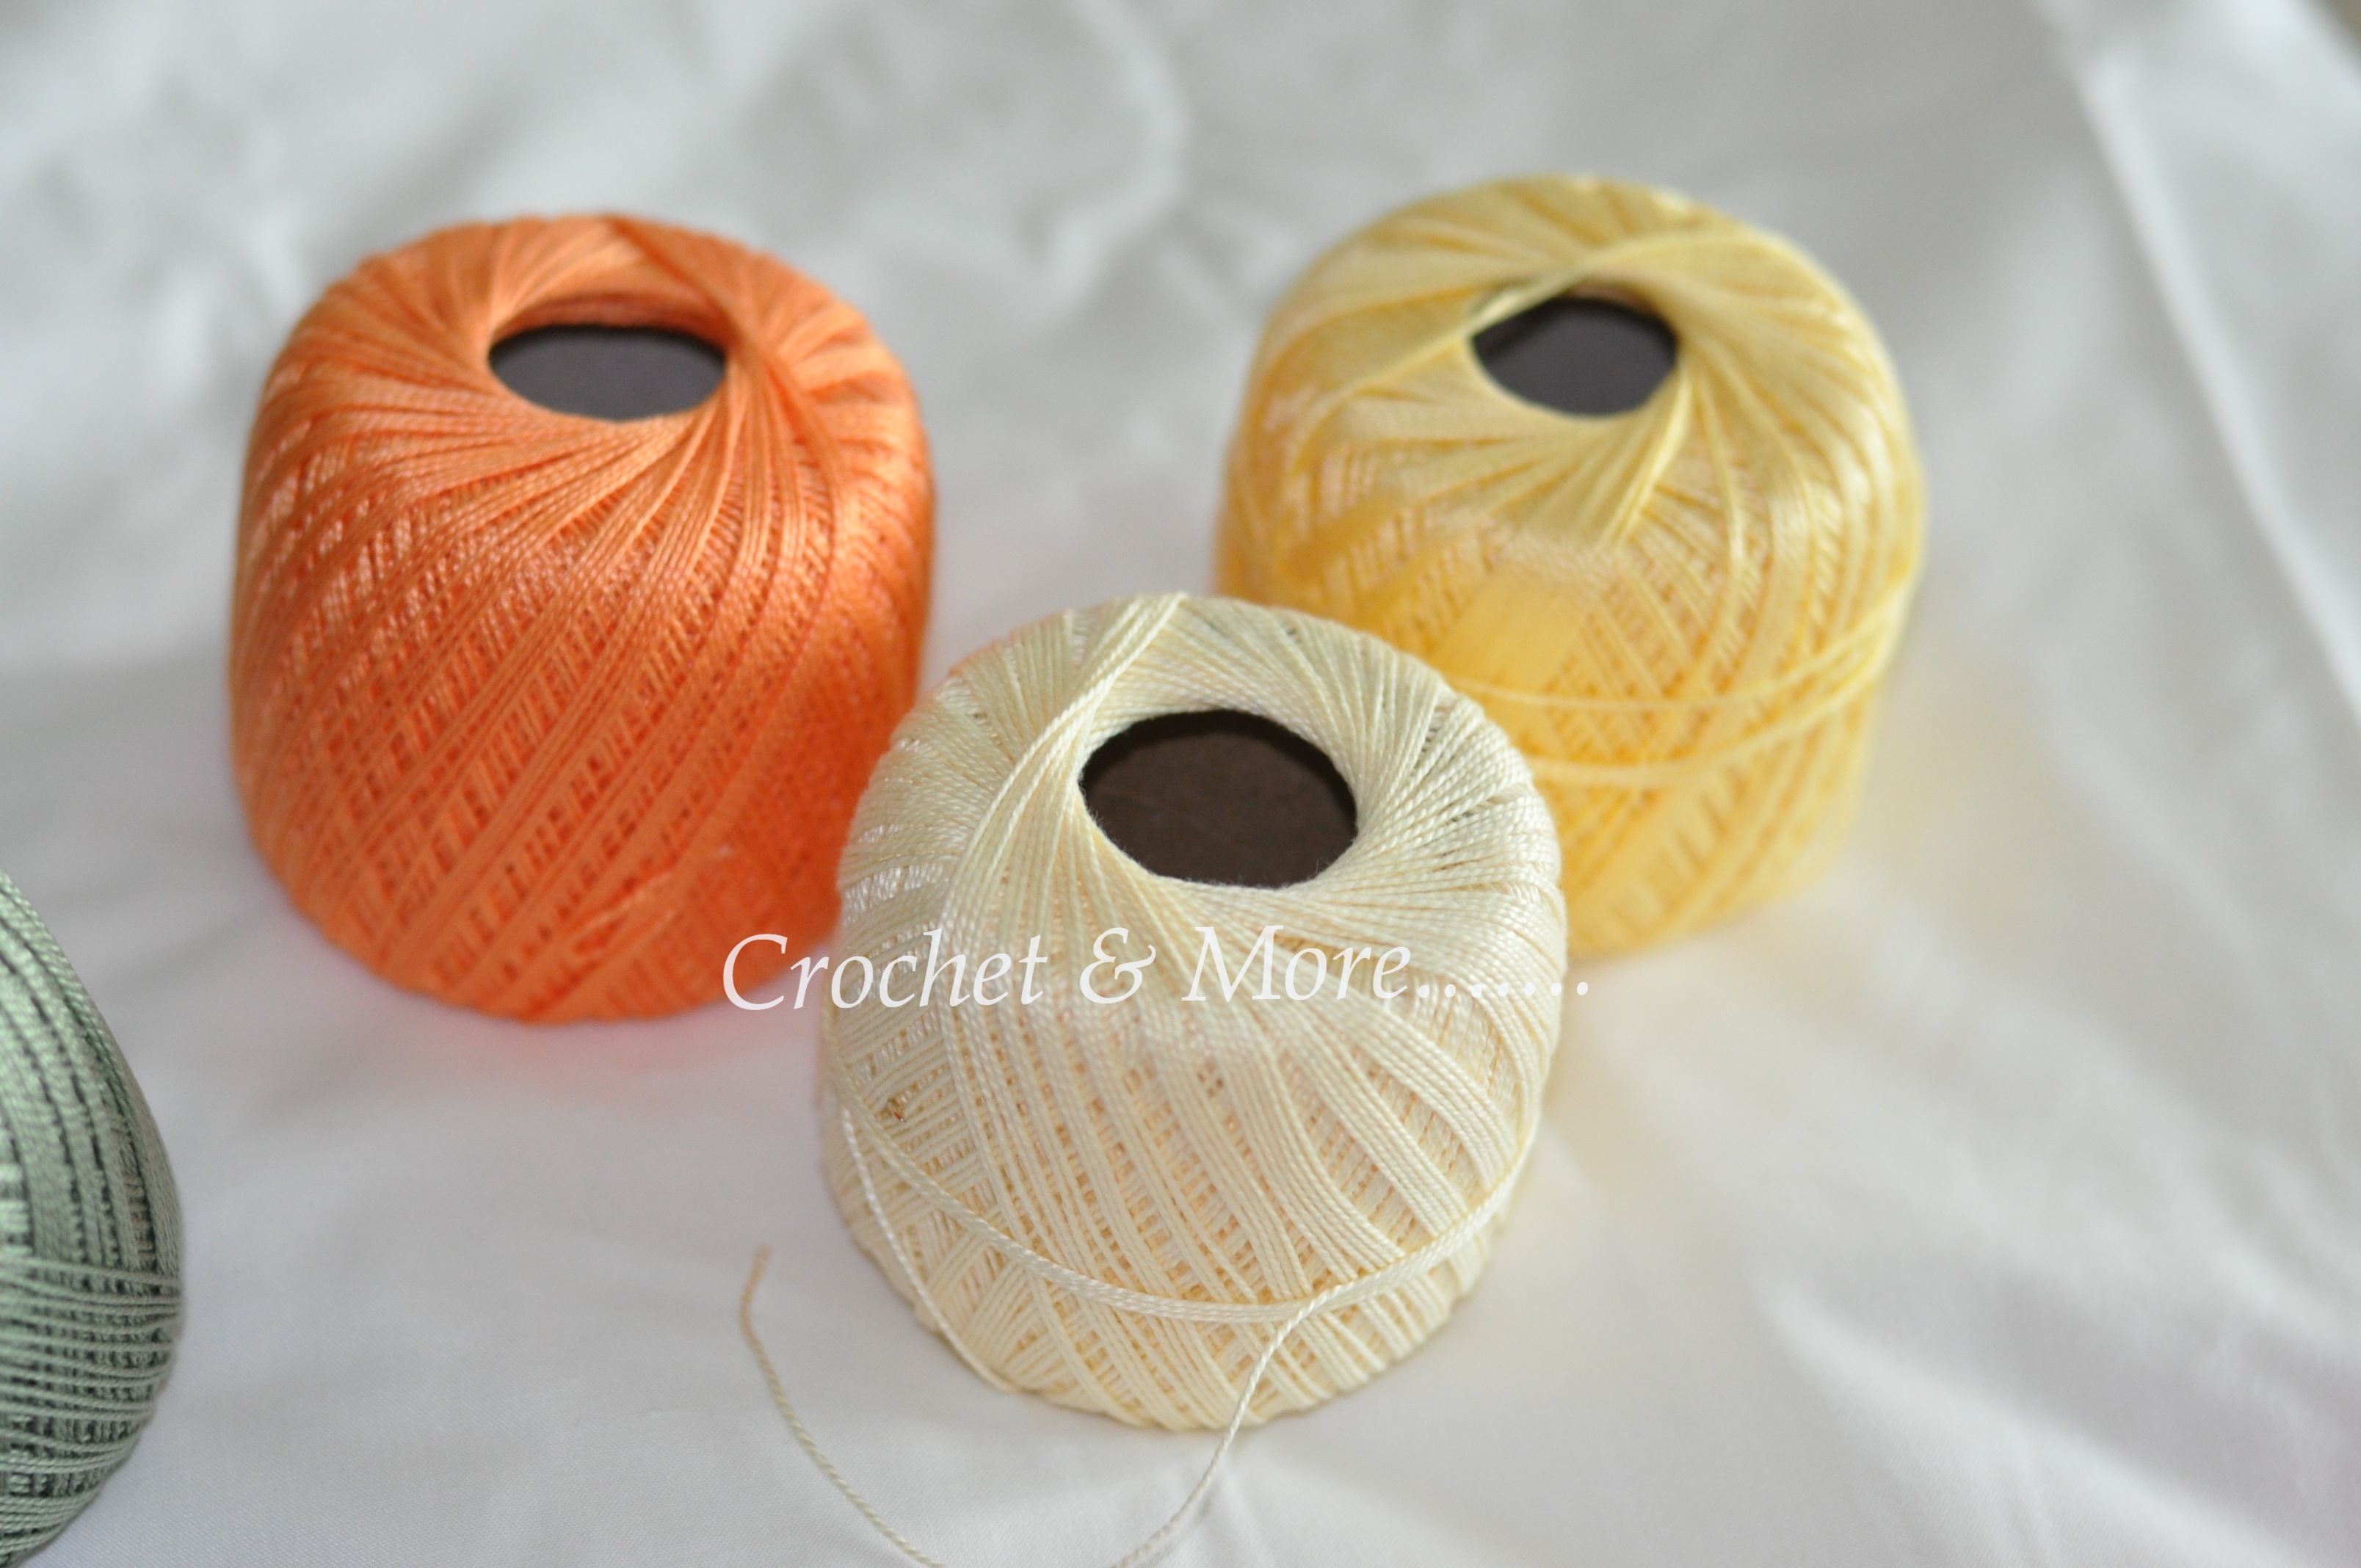 Know your Cotton Yarn/Thread/Hook